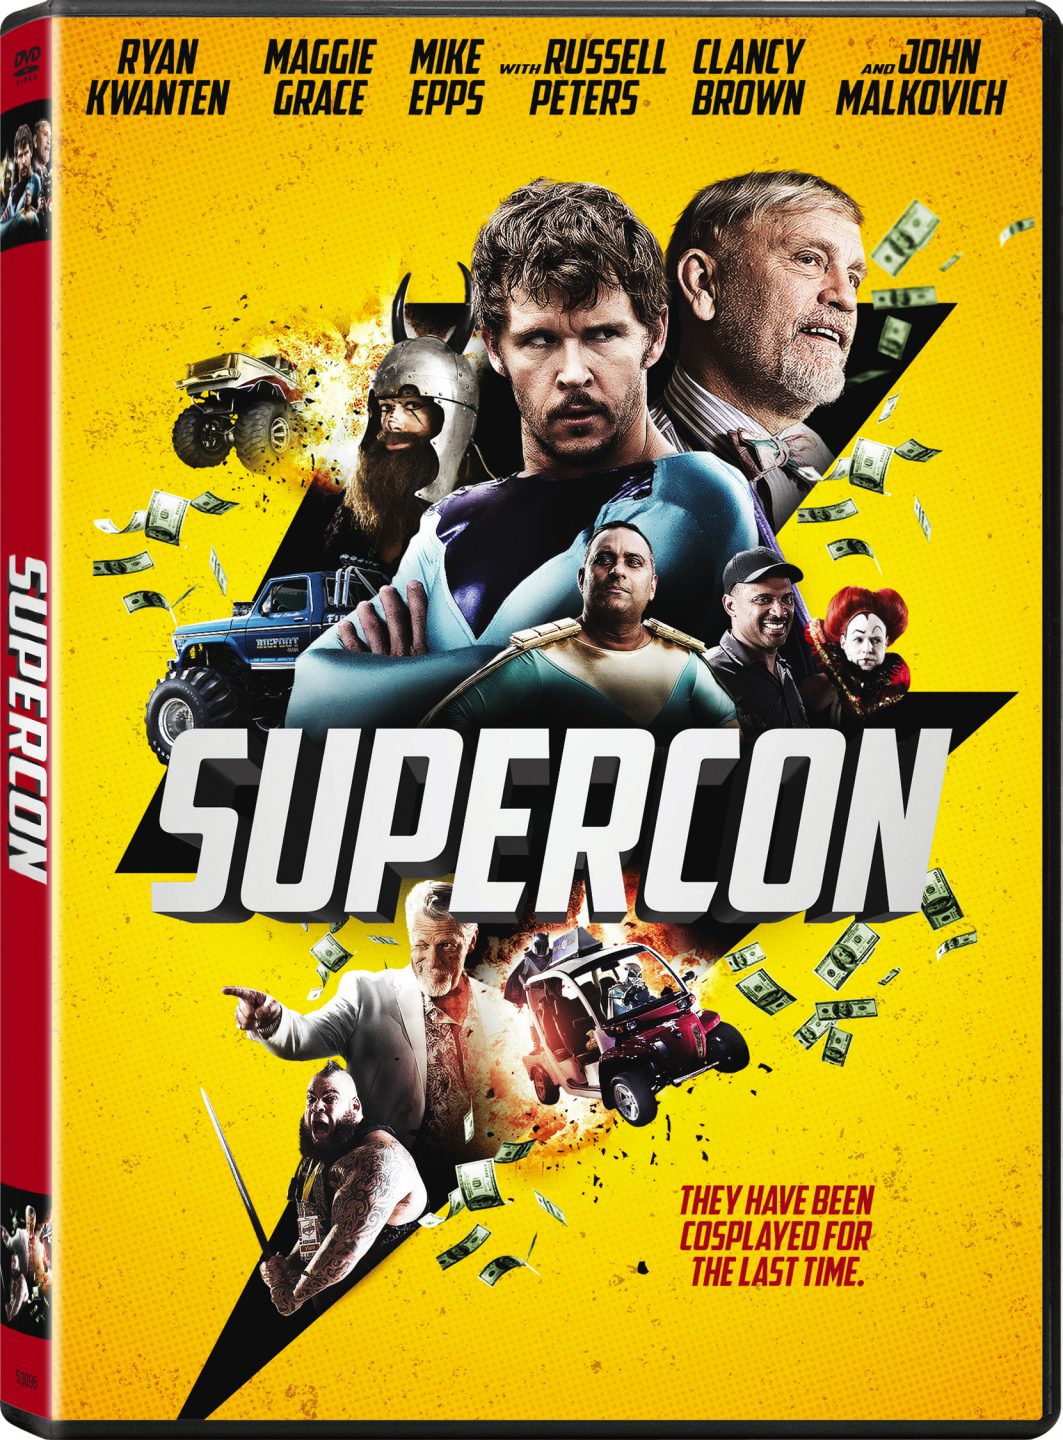 Supercon DVD cover (Sony Pictures Home Entertainment)